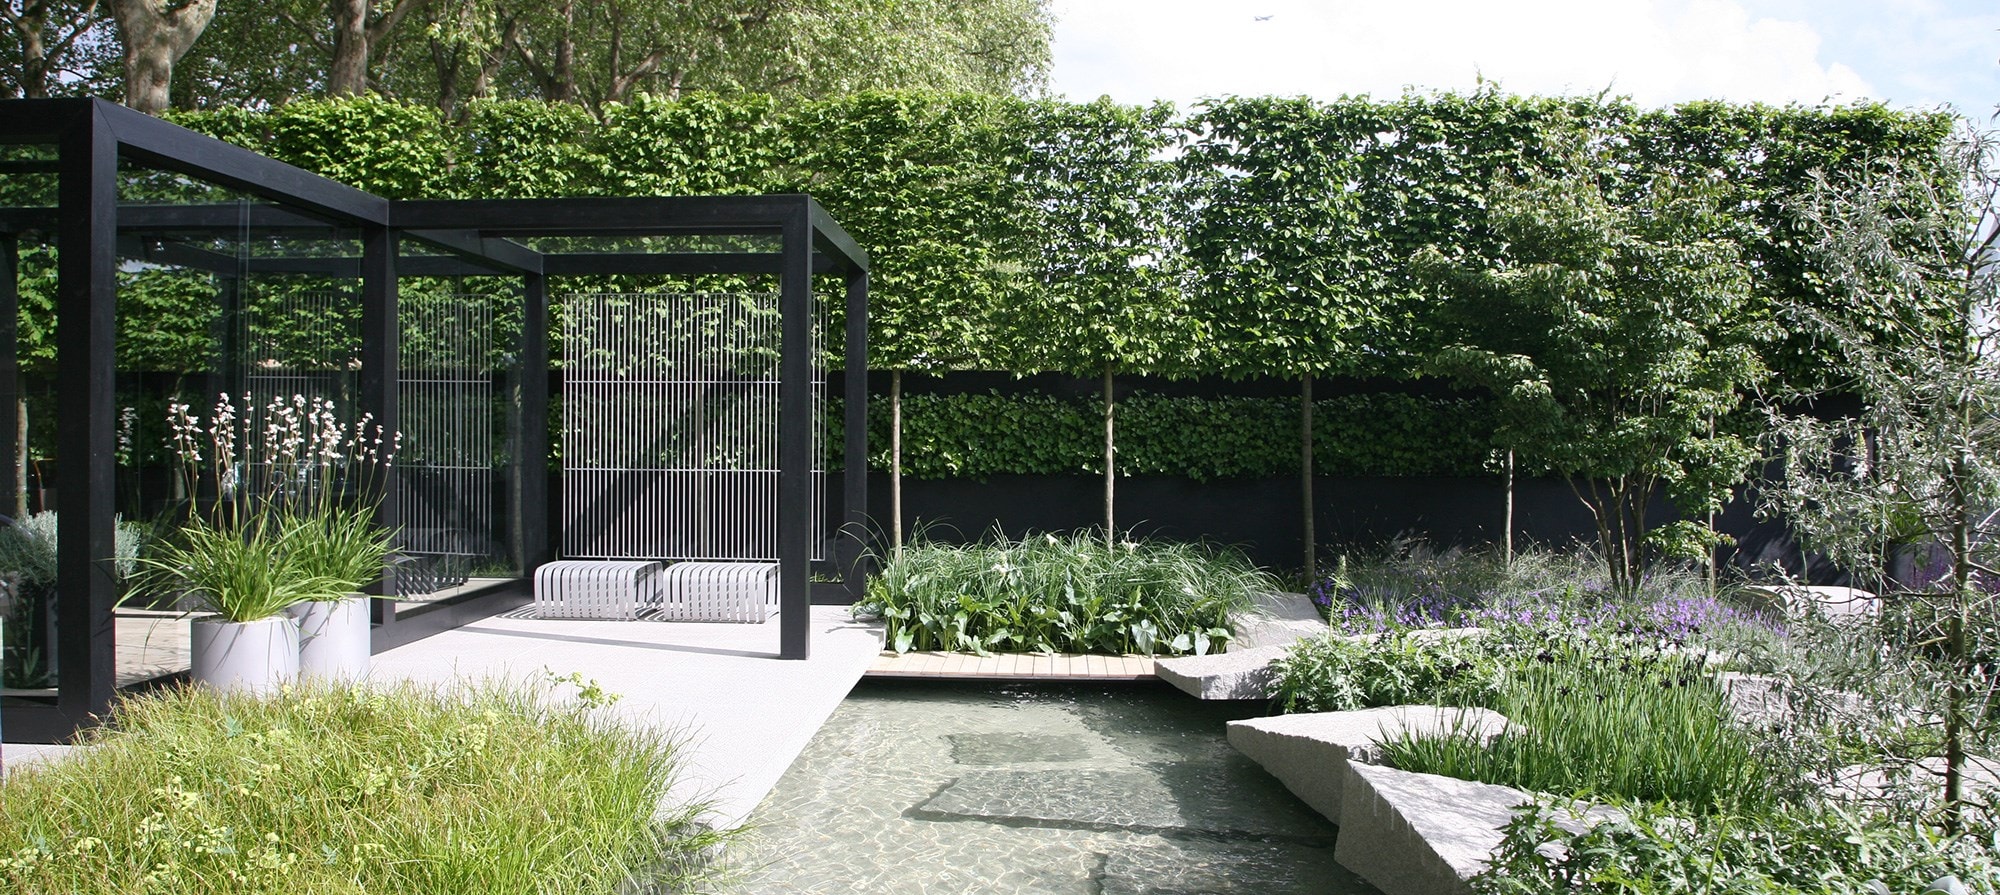 The Daily Telegraph Garden designed by Ulf Nordfjell